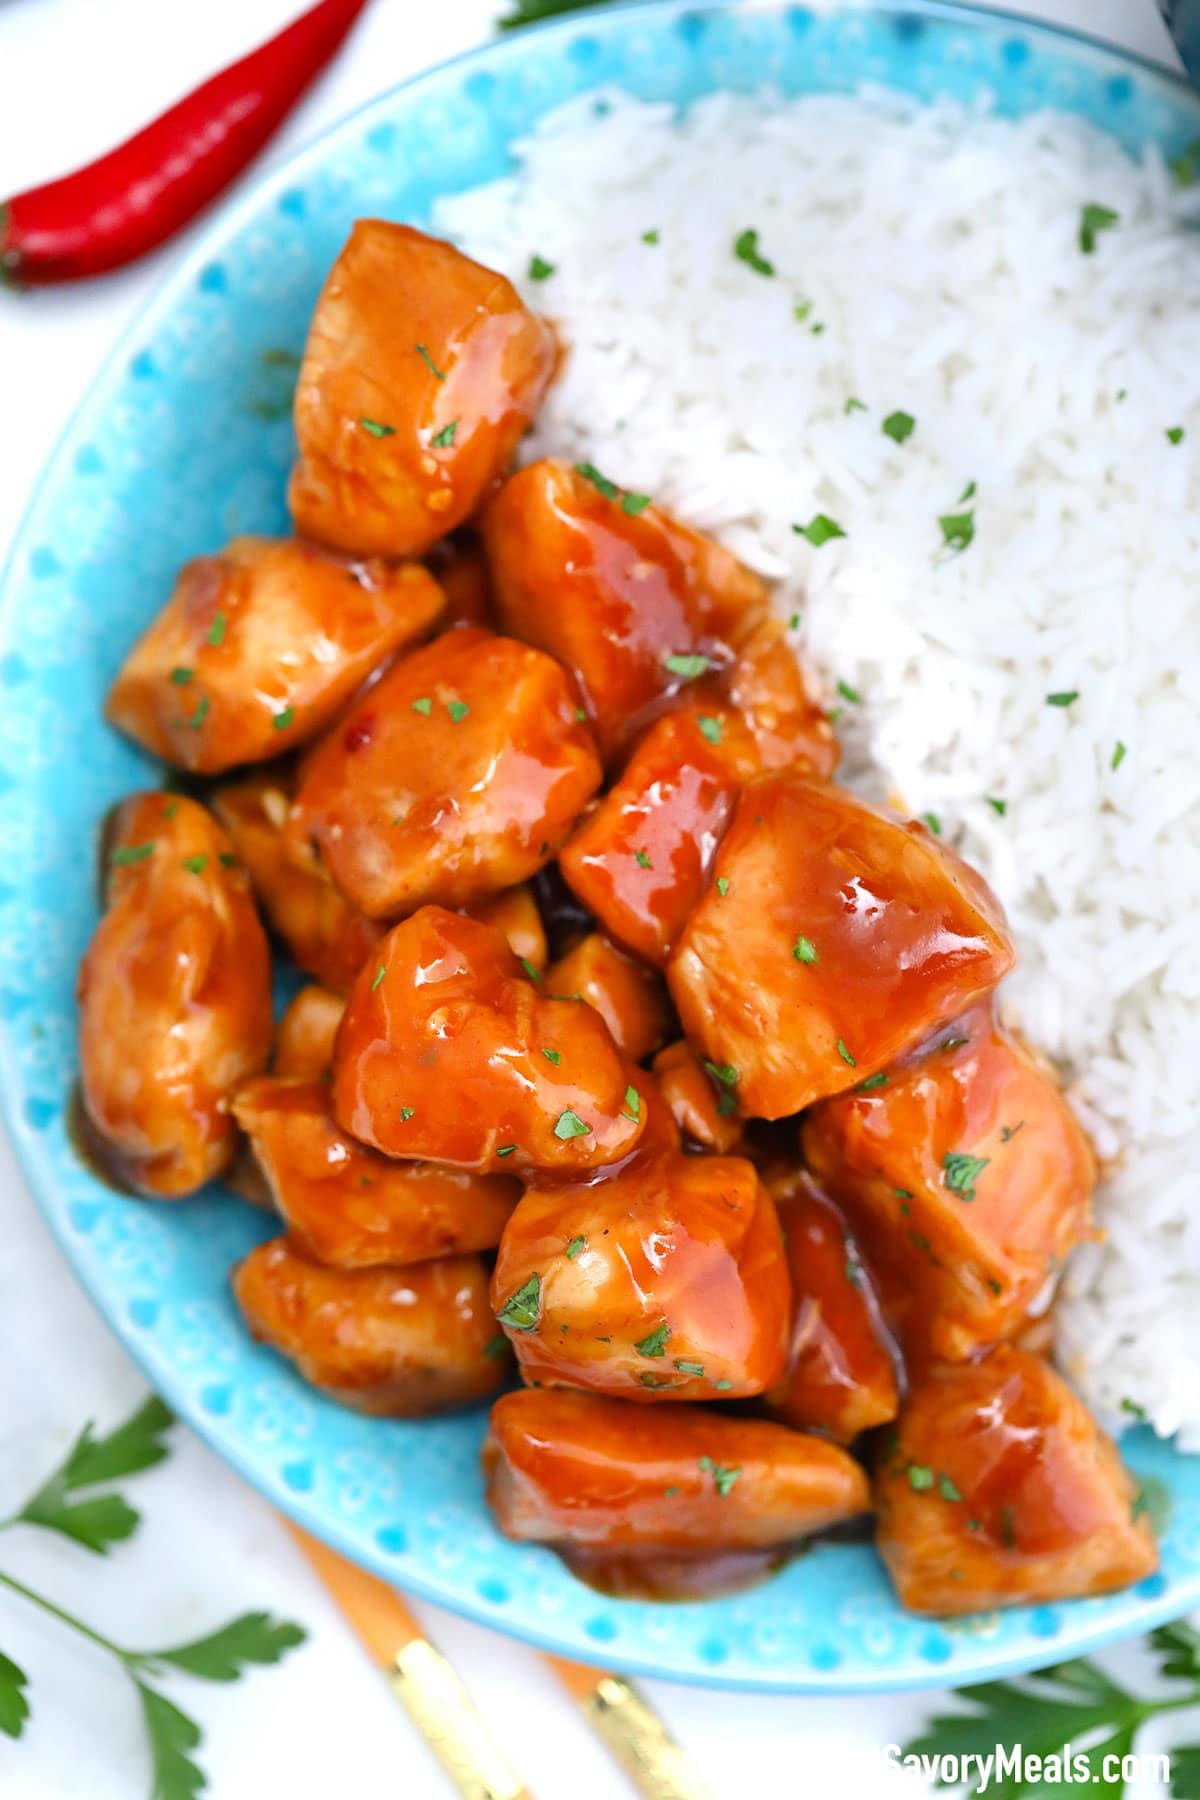 Slow Cooker Bourbon Chicken - Sweet and Savory Meals